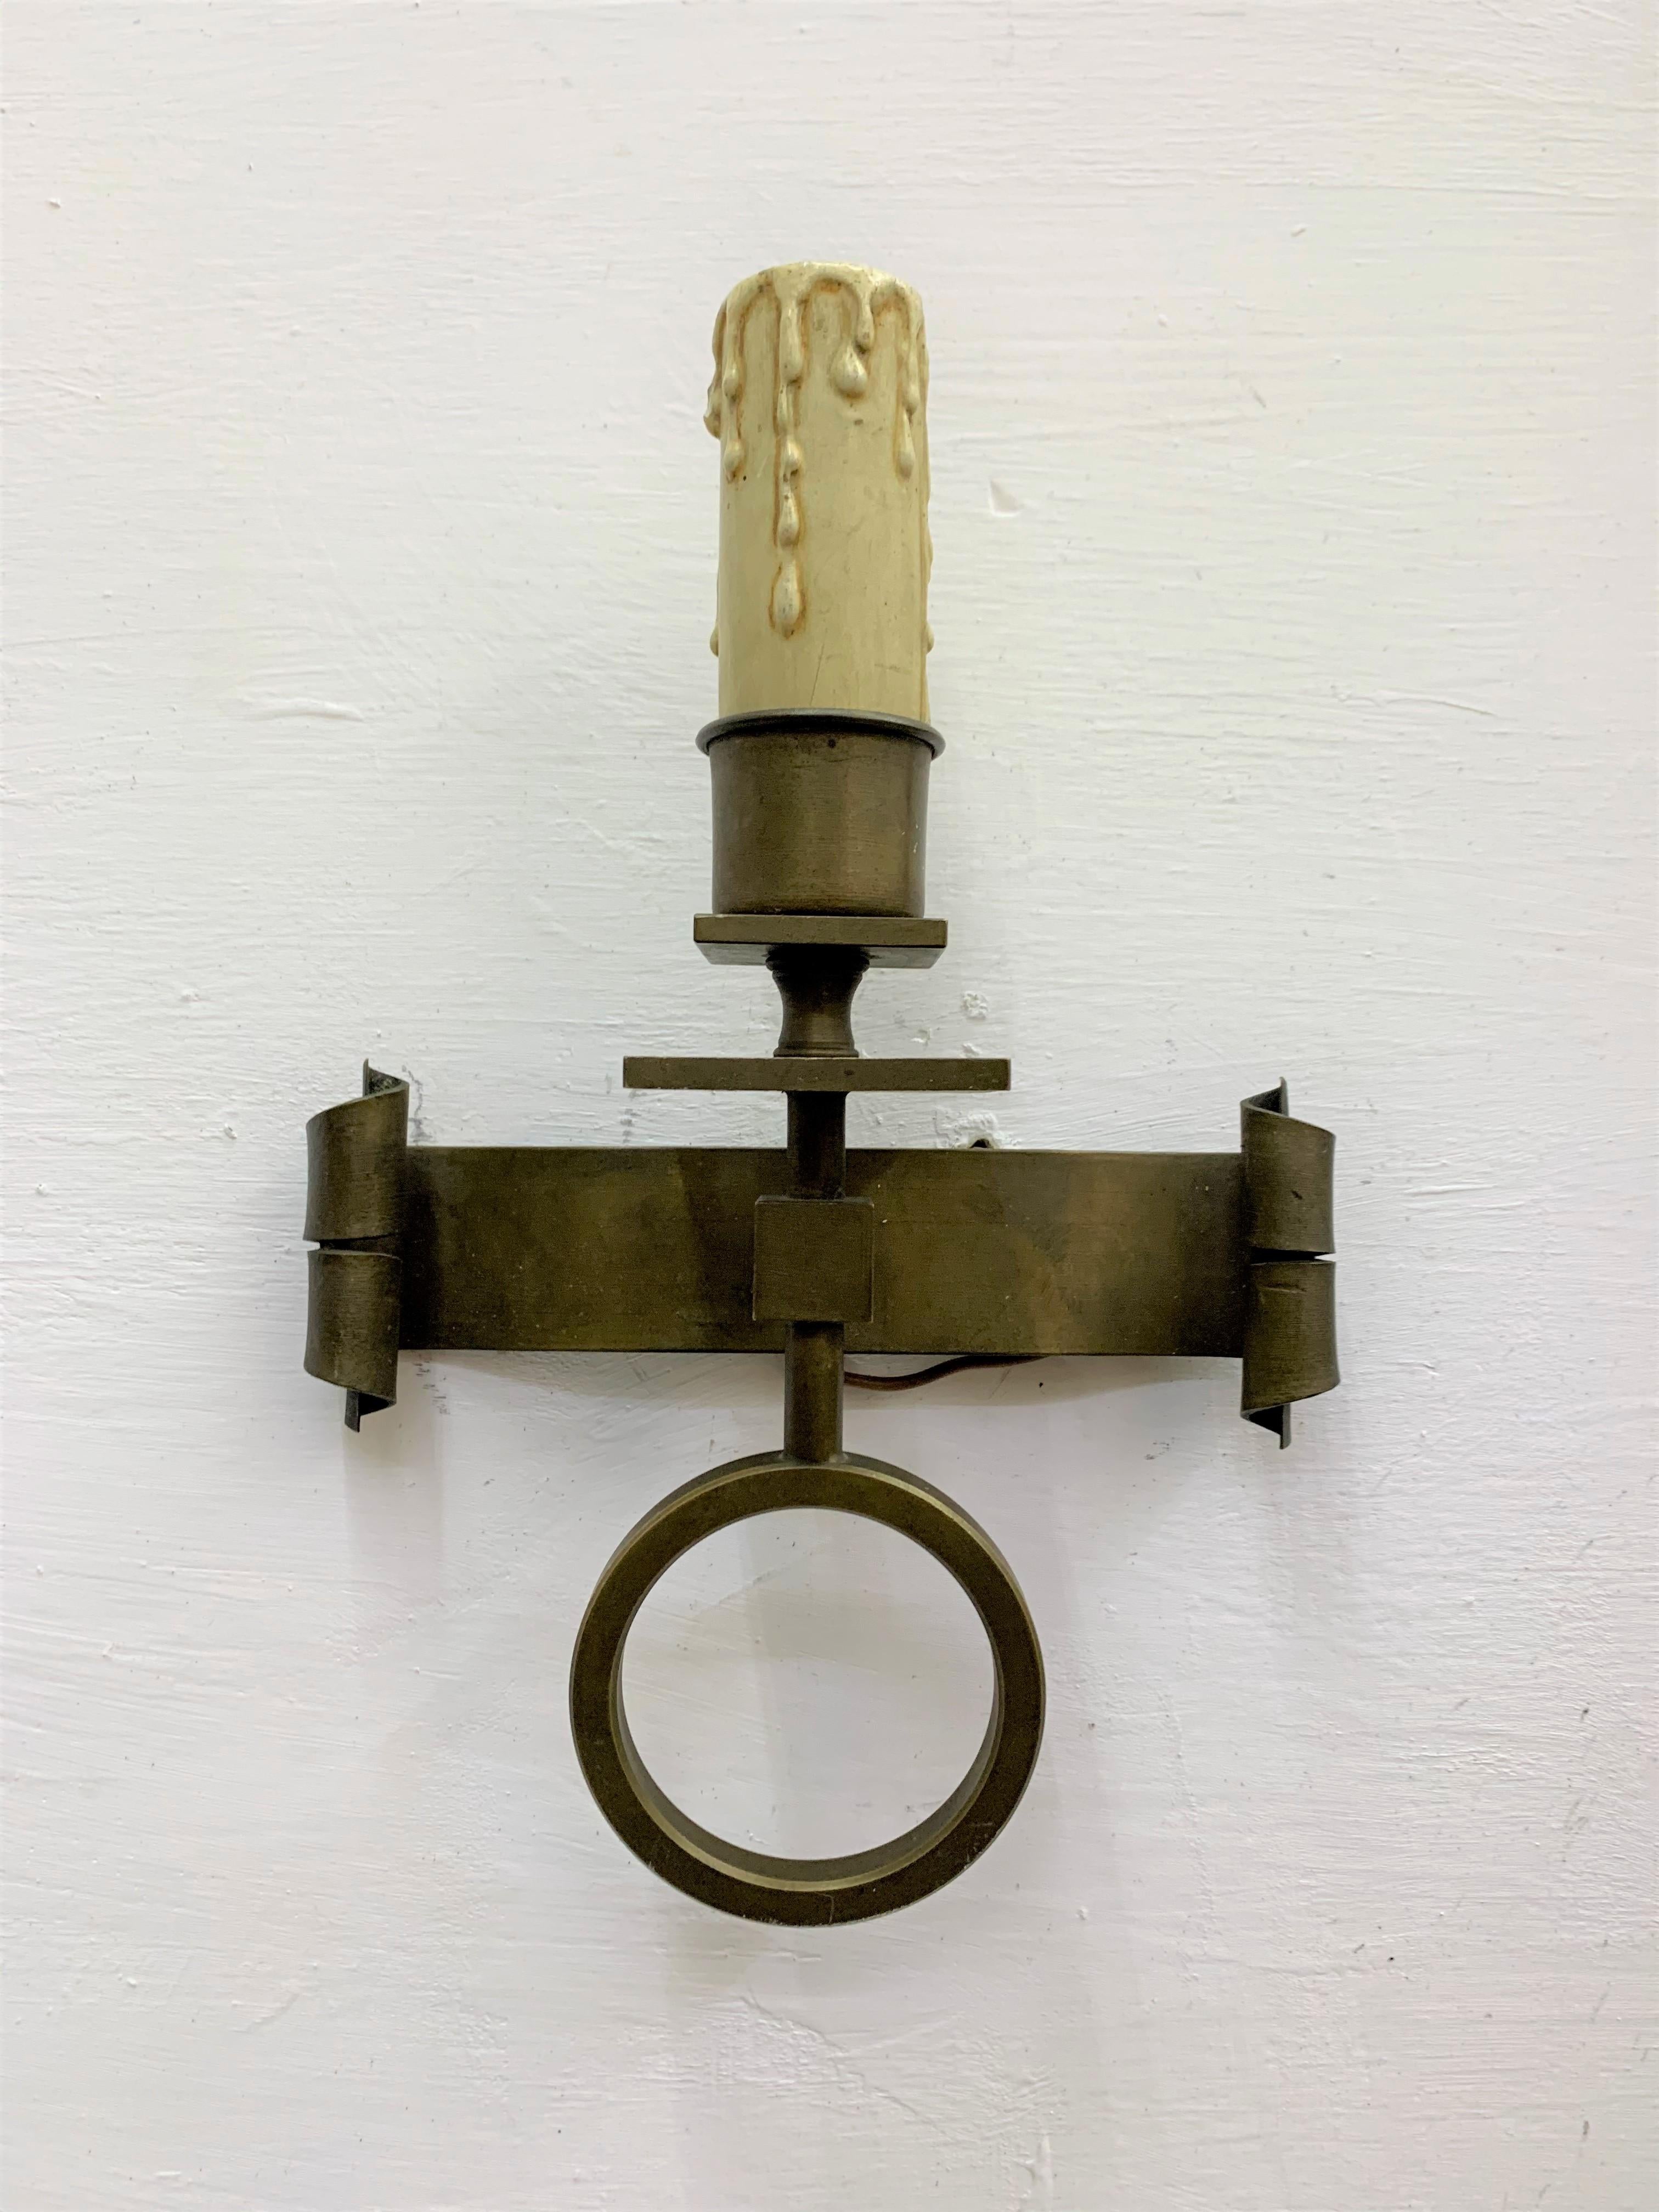 Pair of Mid-Century Modern sconces, handwrought in solid brass and carved wood bulb-holders. 
These Sconces originally had a screen attached to the bulb which can be replaced easily if desired.